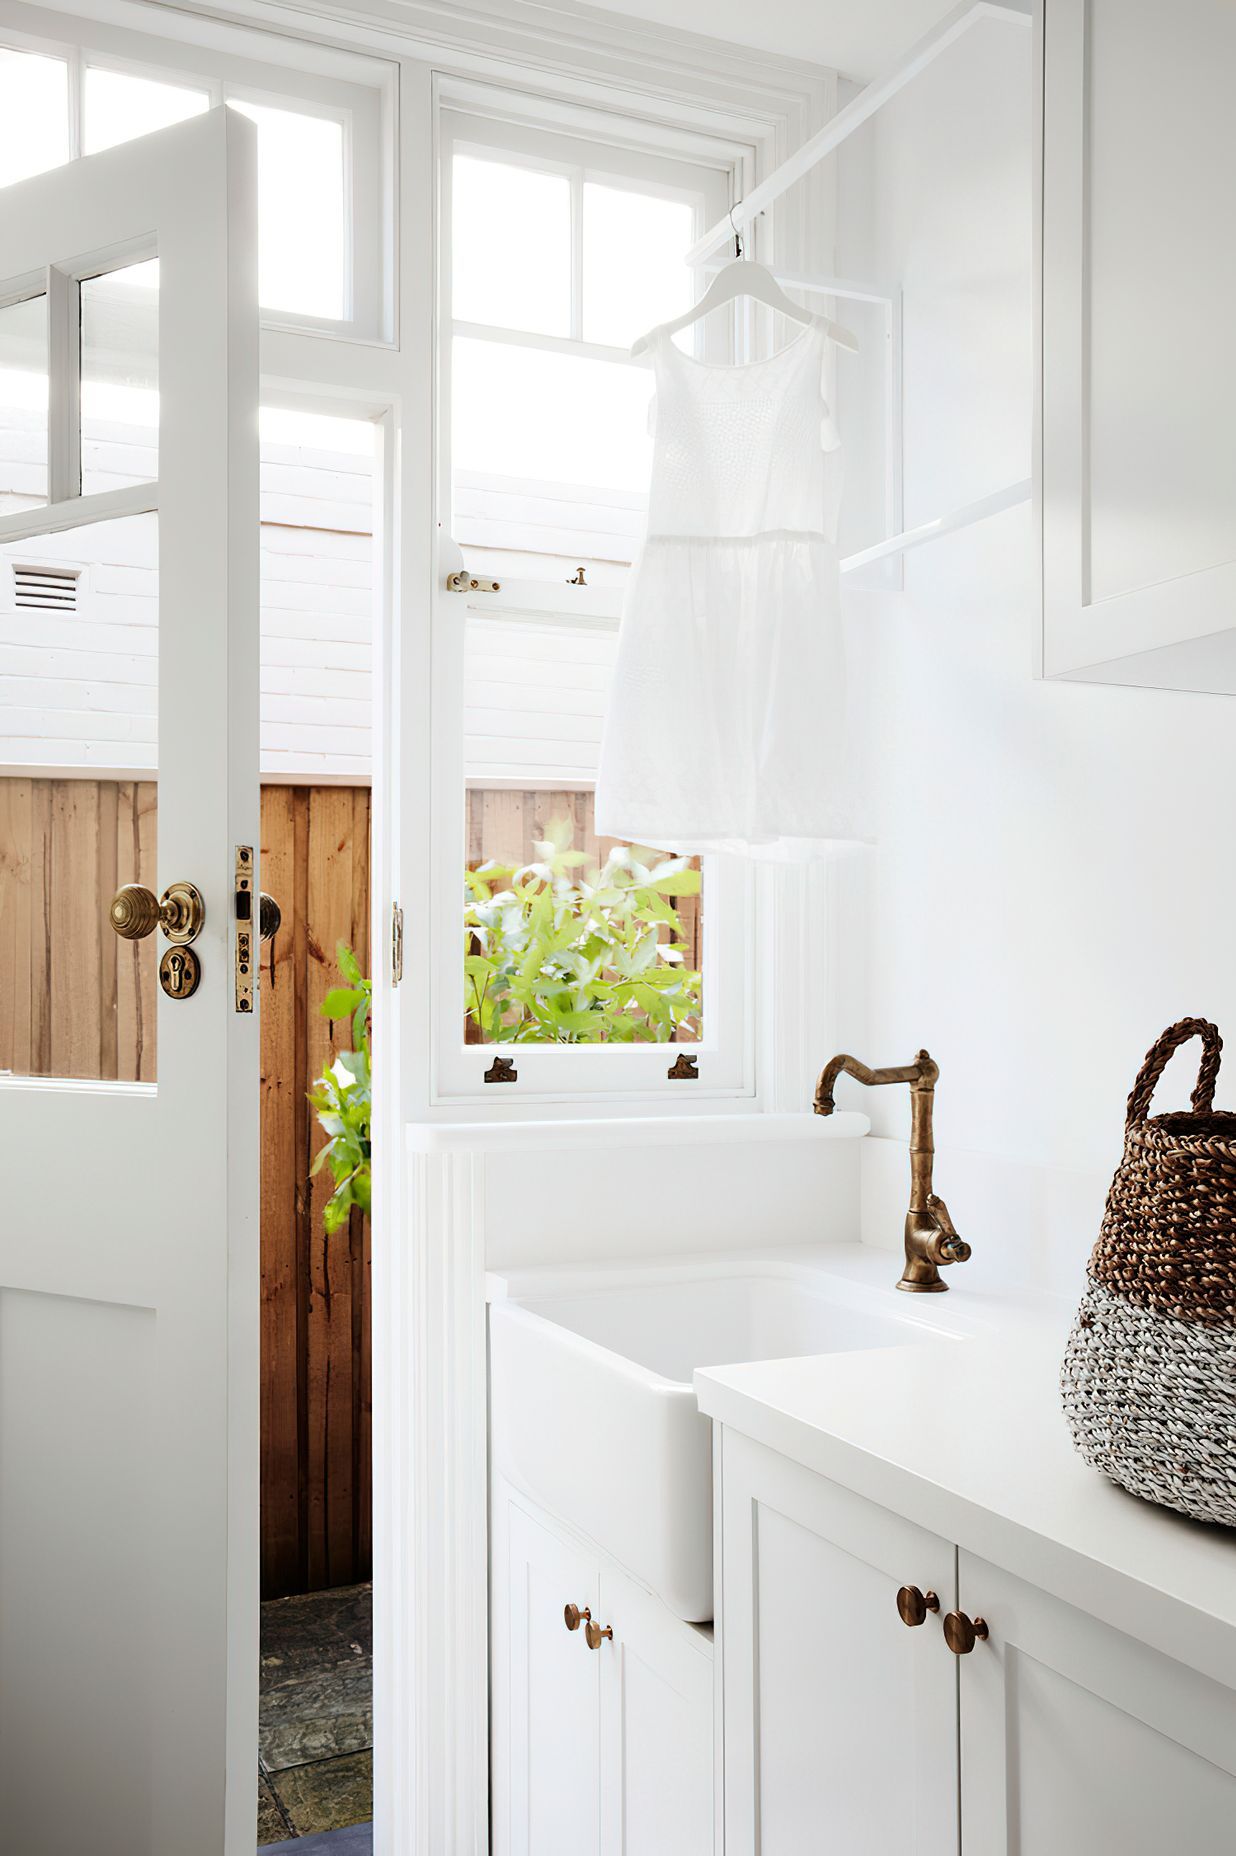 WHITE LAUNDRY - This white laundry features a butlers sink to complement the kitchen, similar tapware and mosaic tiling. It is highly functional and beautiful.